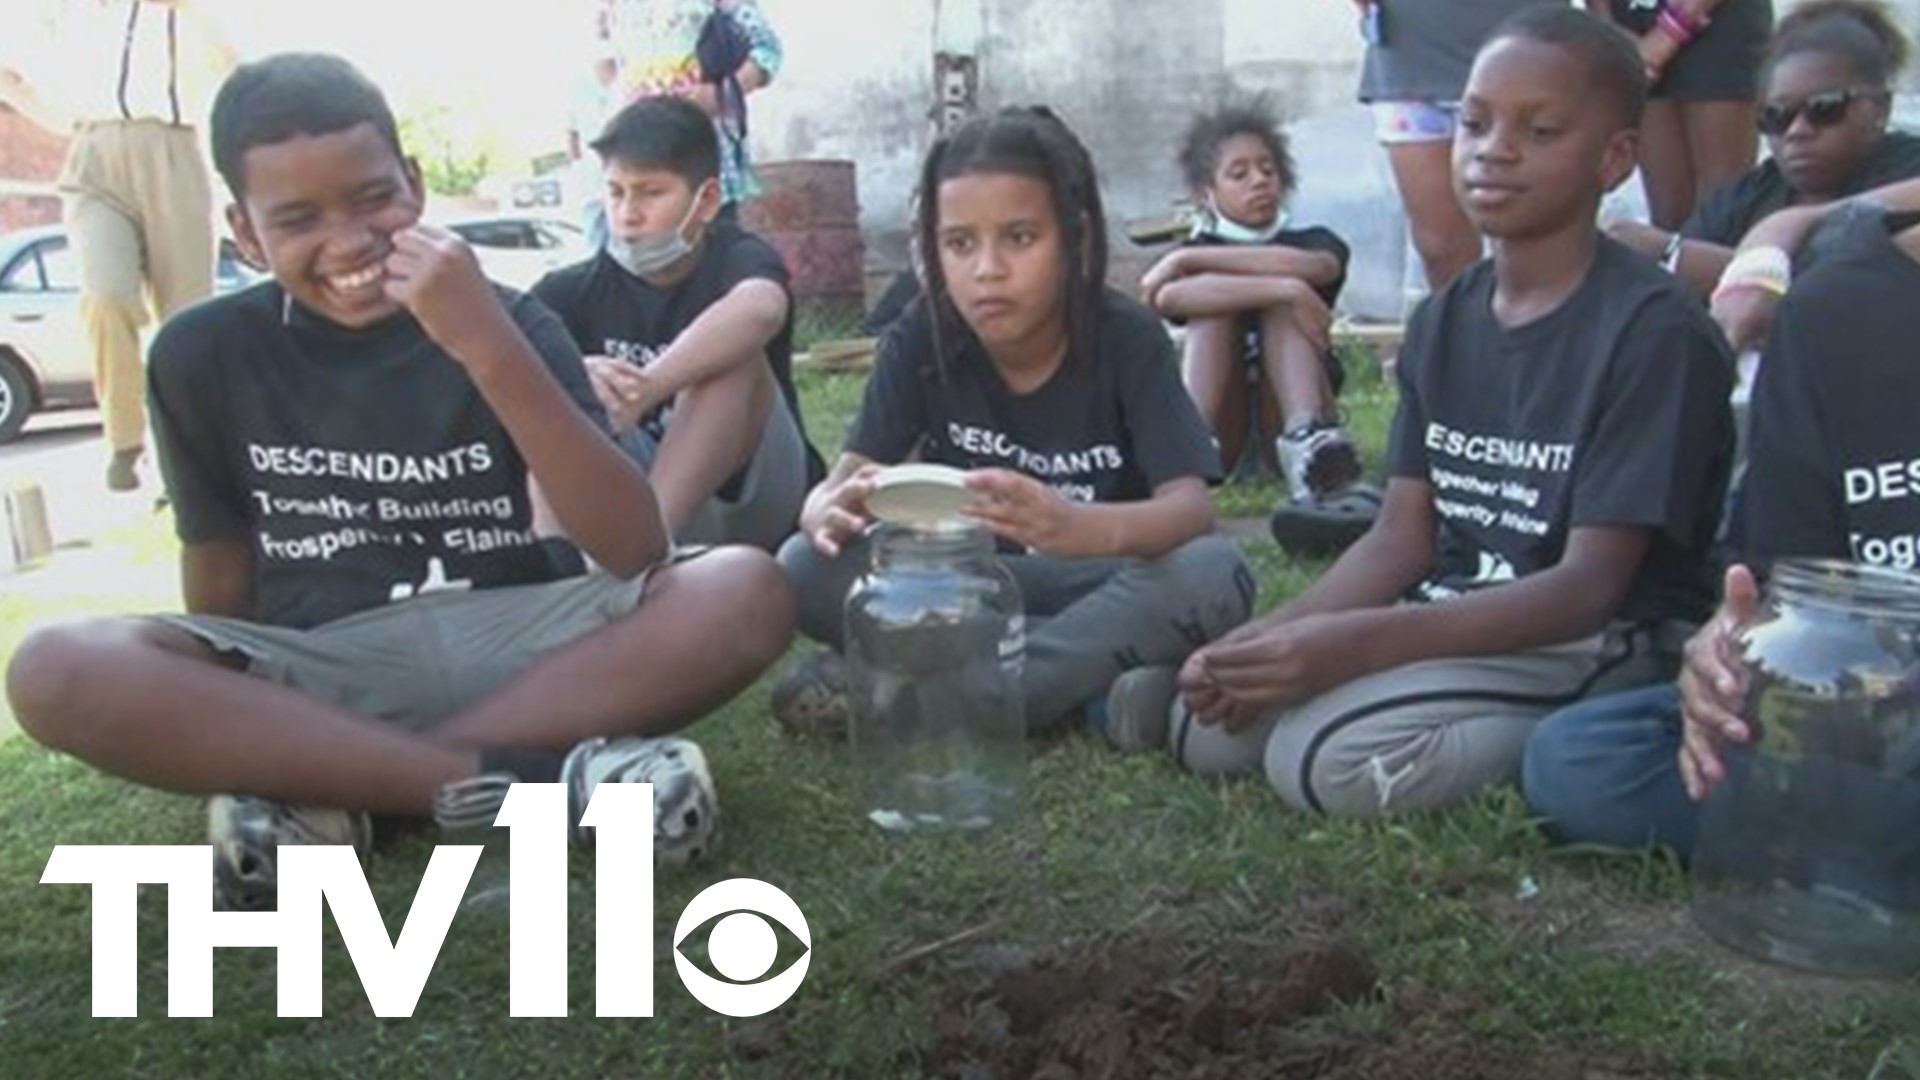 A historic Arkansas community observed Earth Day by sharing its sacred ground.